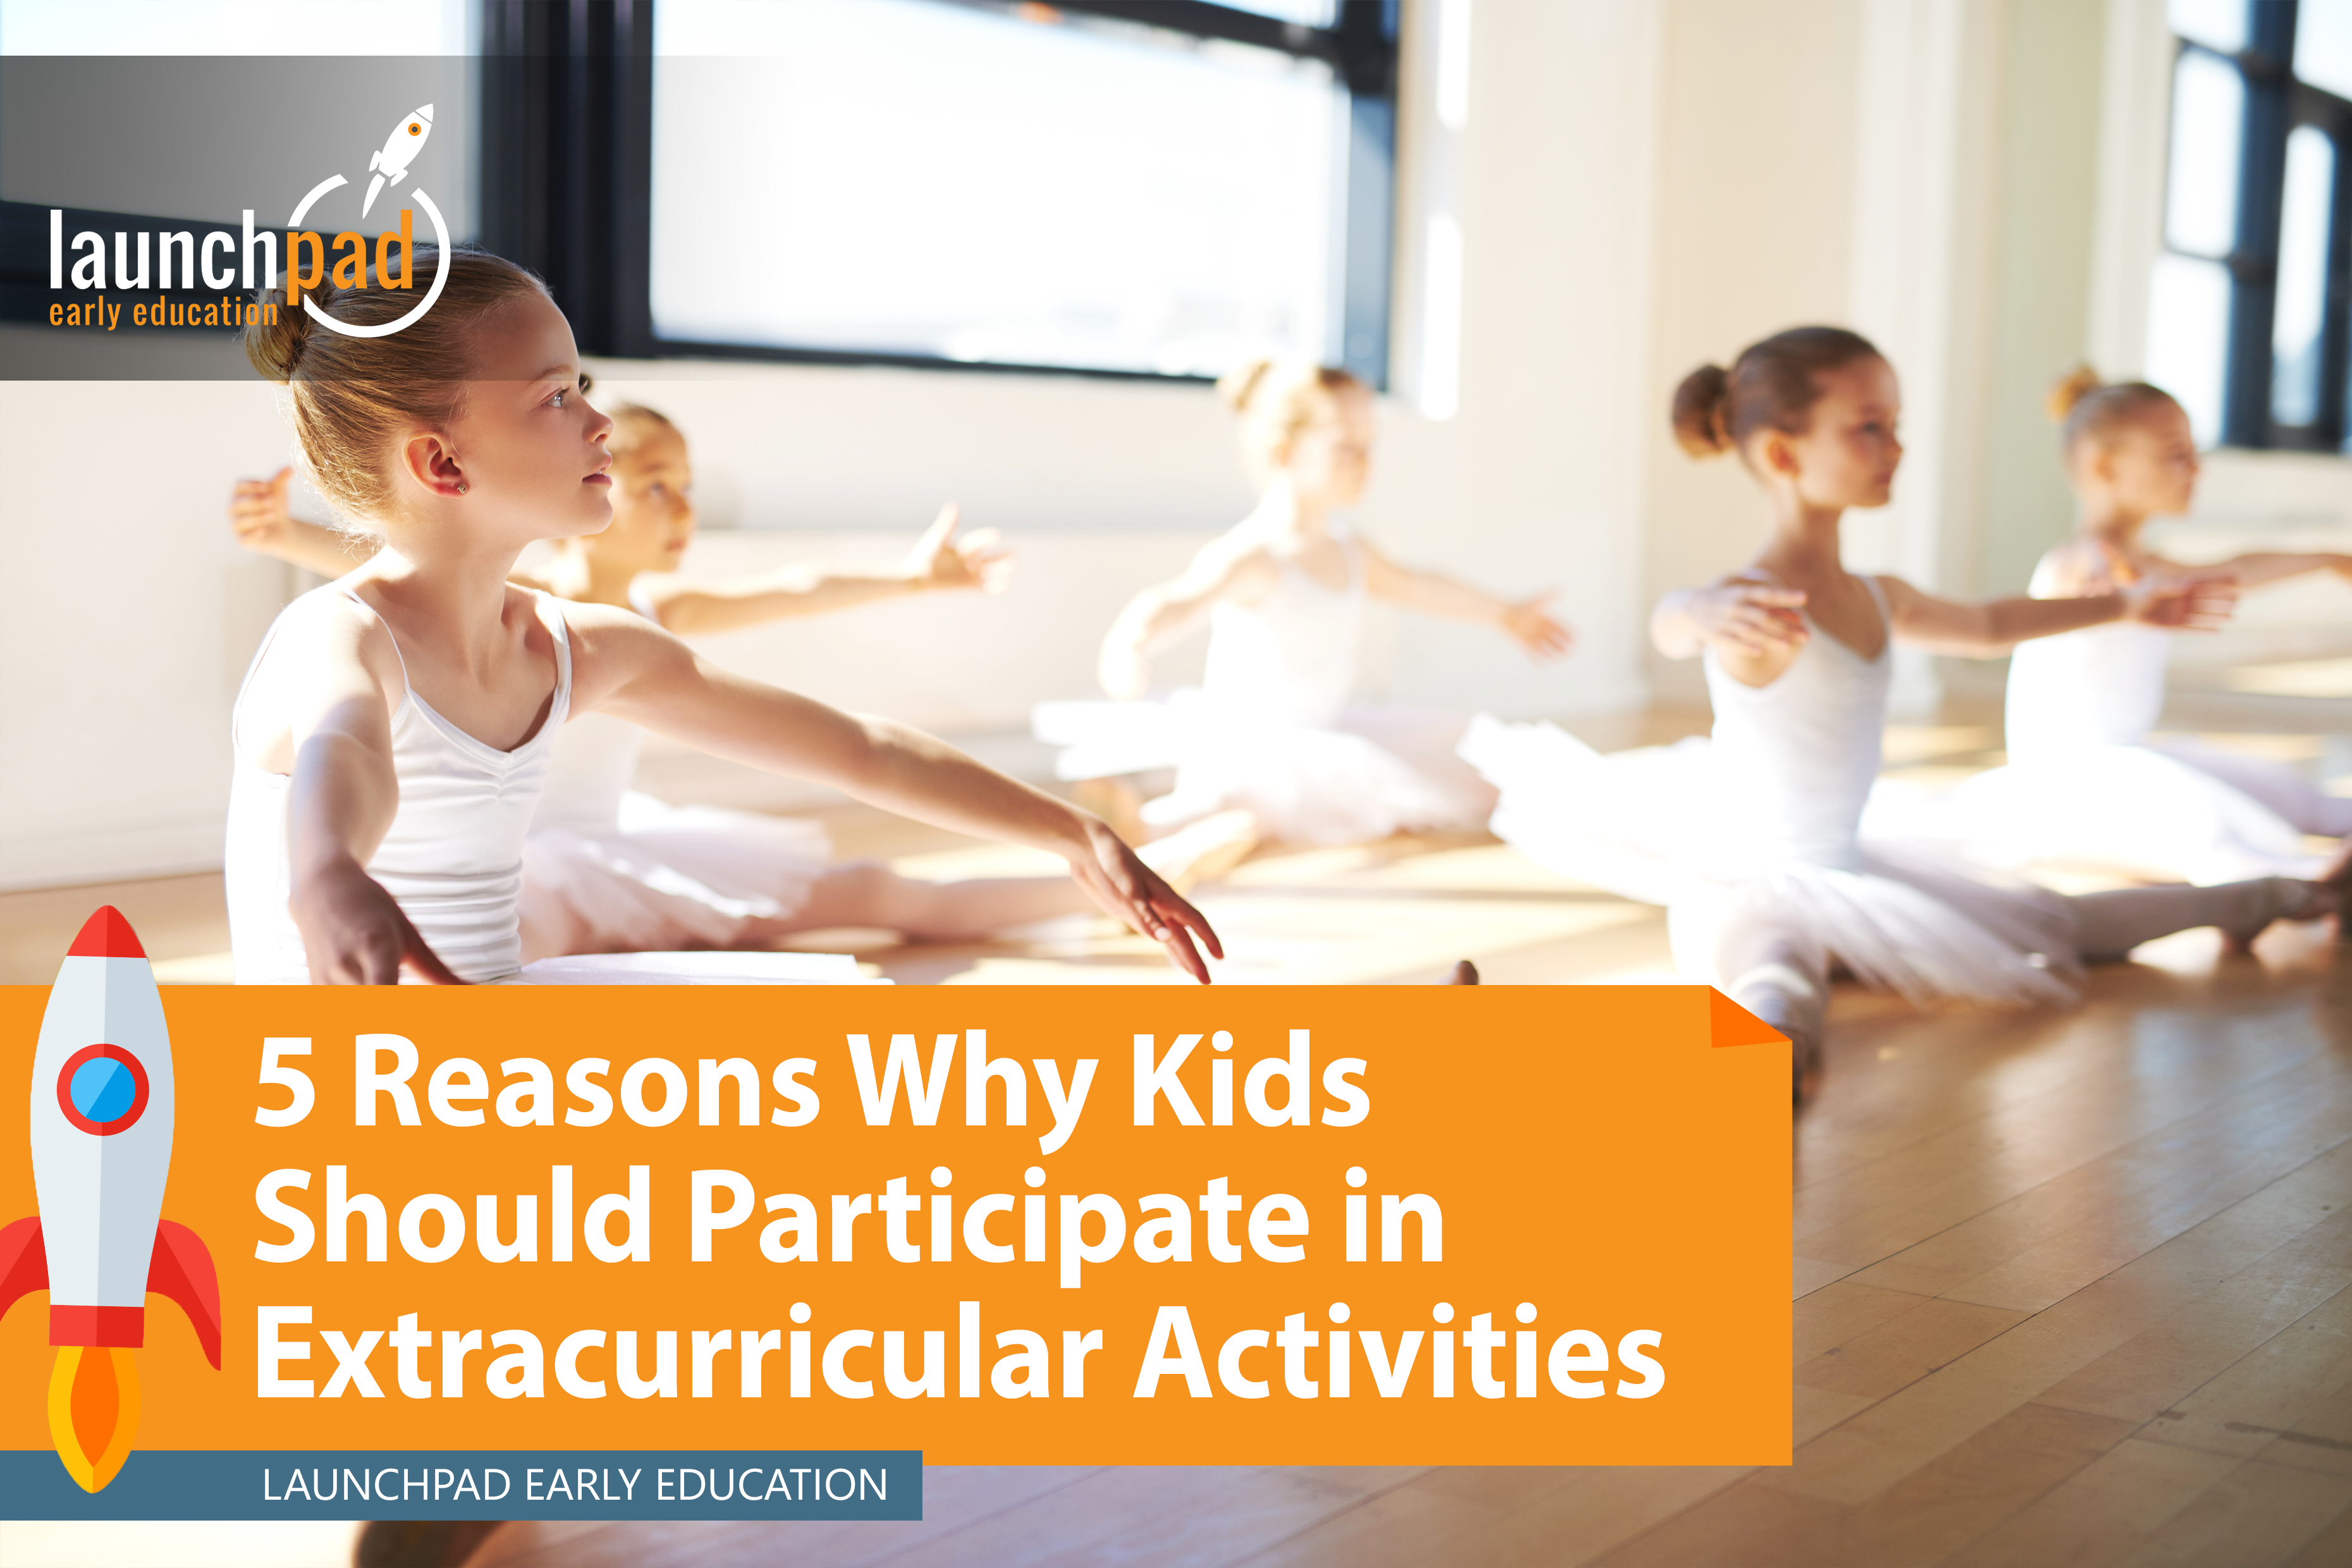 5 reasons why kids should participate in extracurricular activities